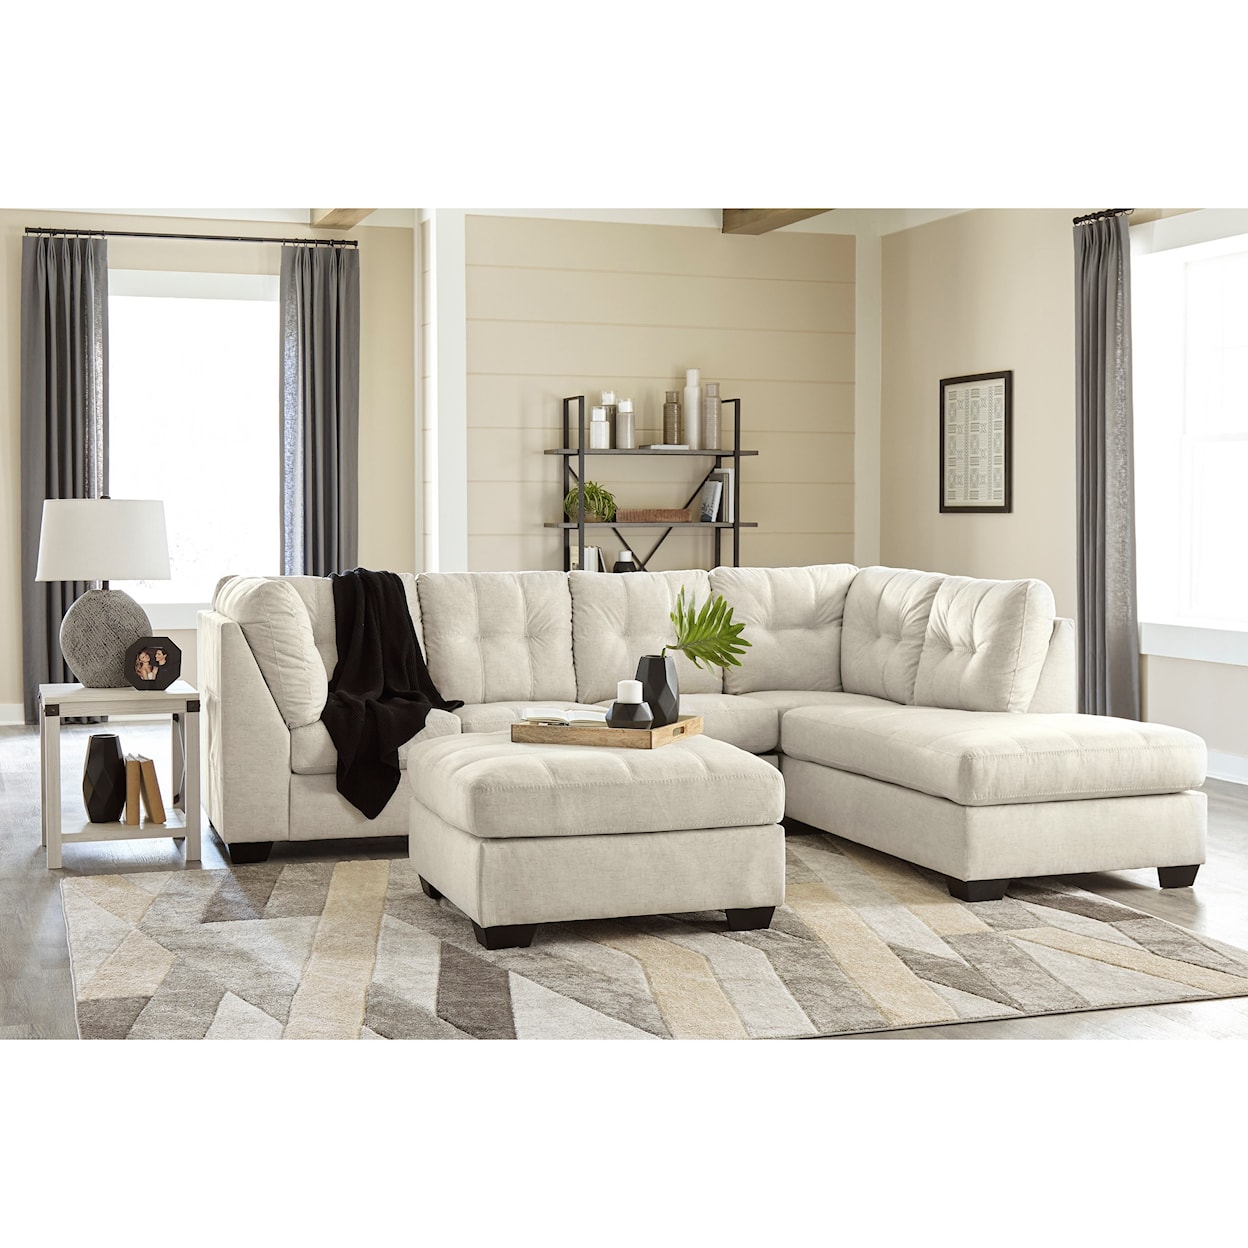 Ashley Furniture Benchcraft Falkirk 2-Piece Sectional with Chaise